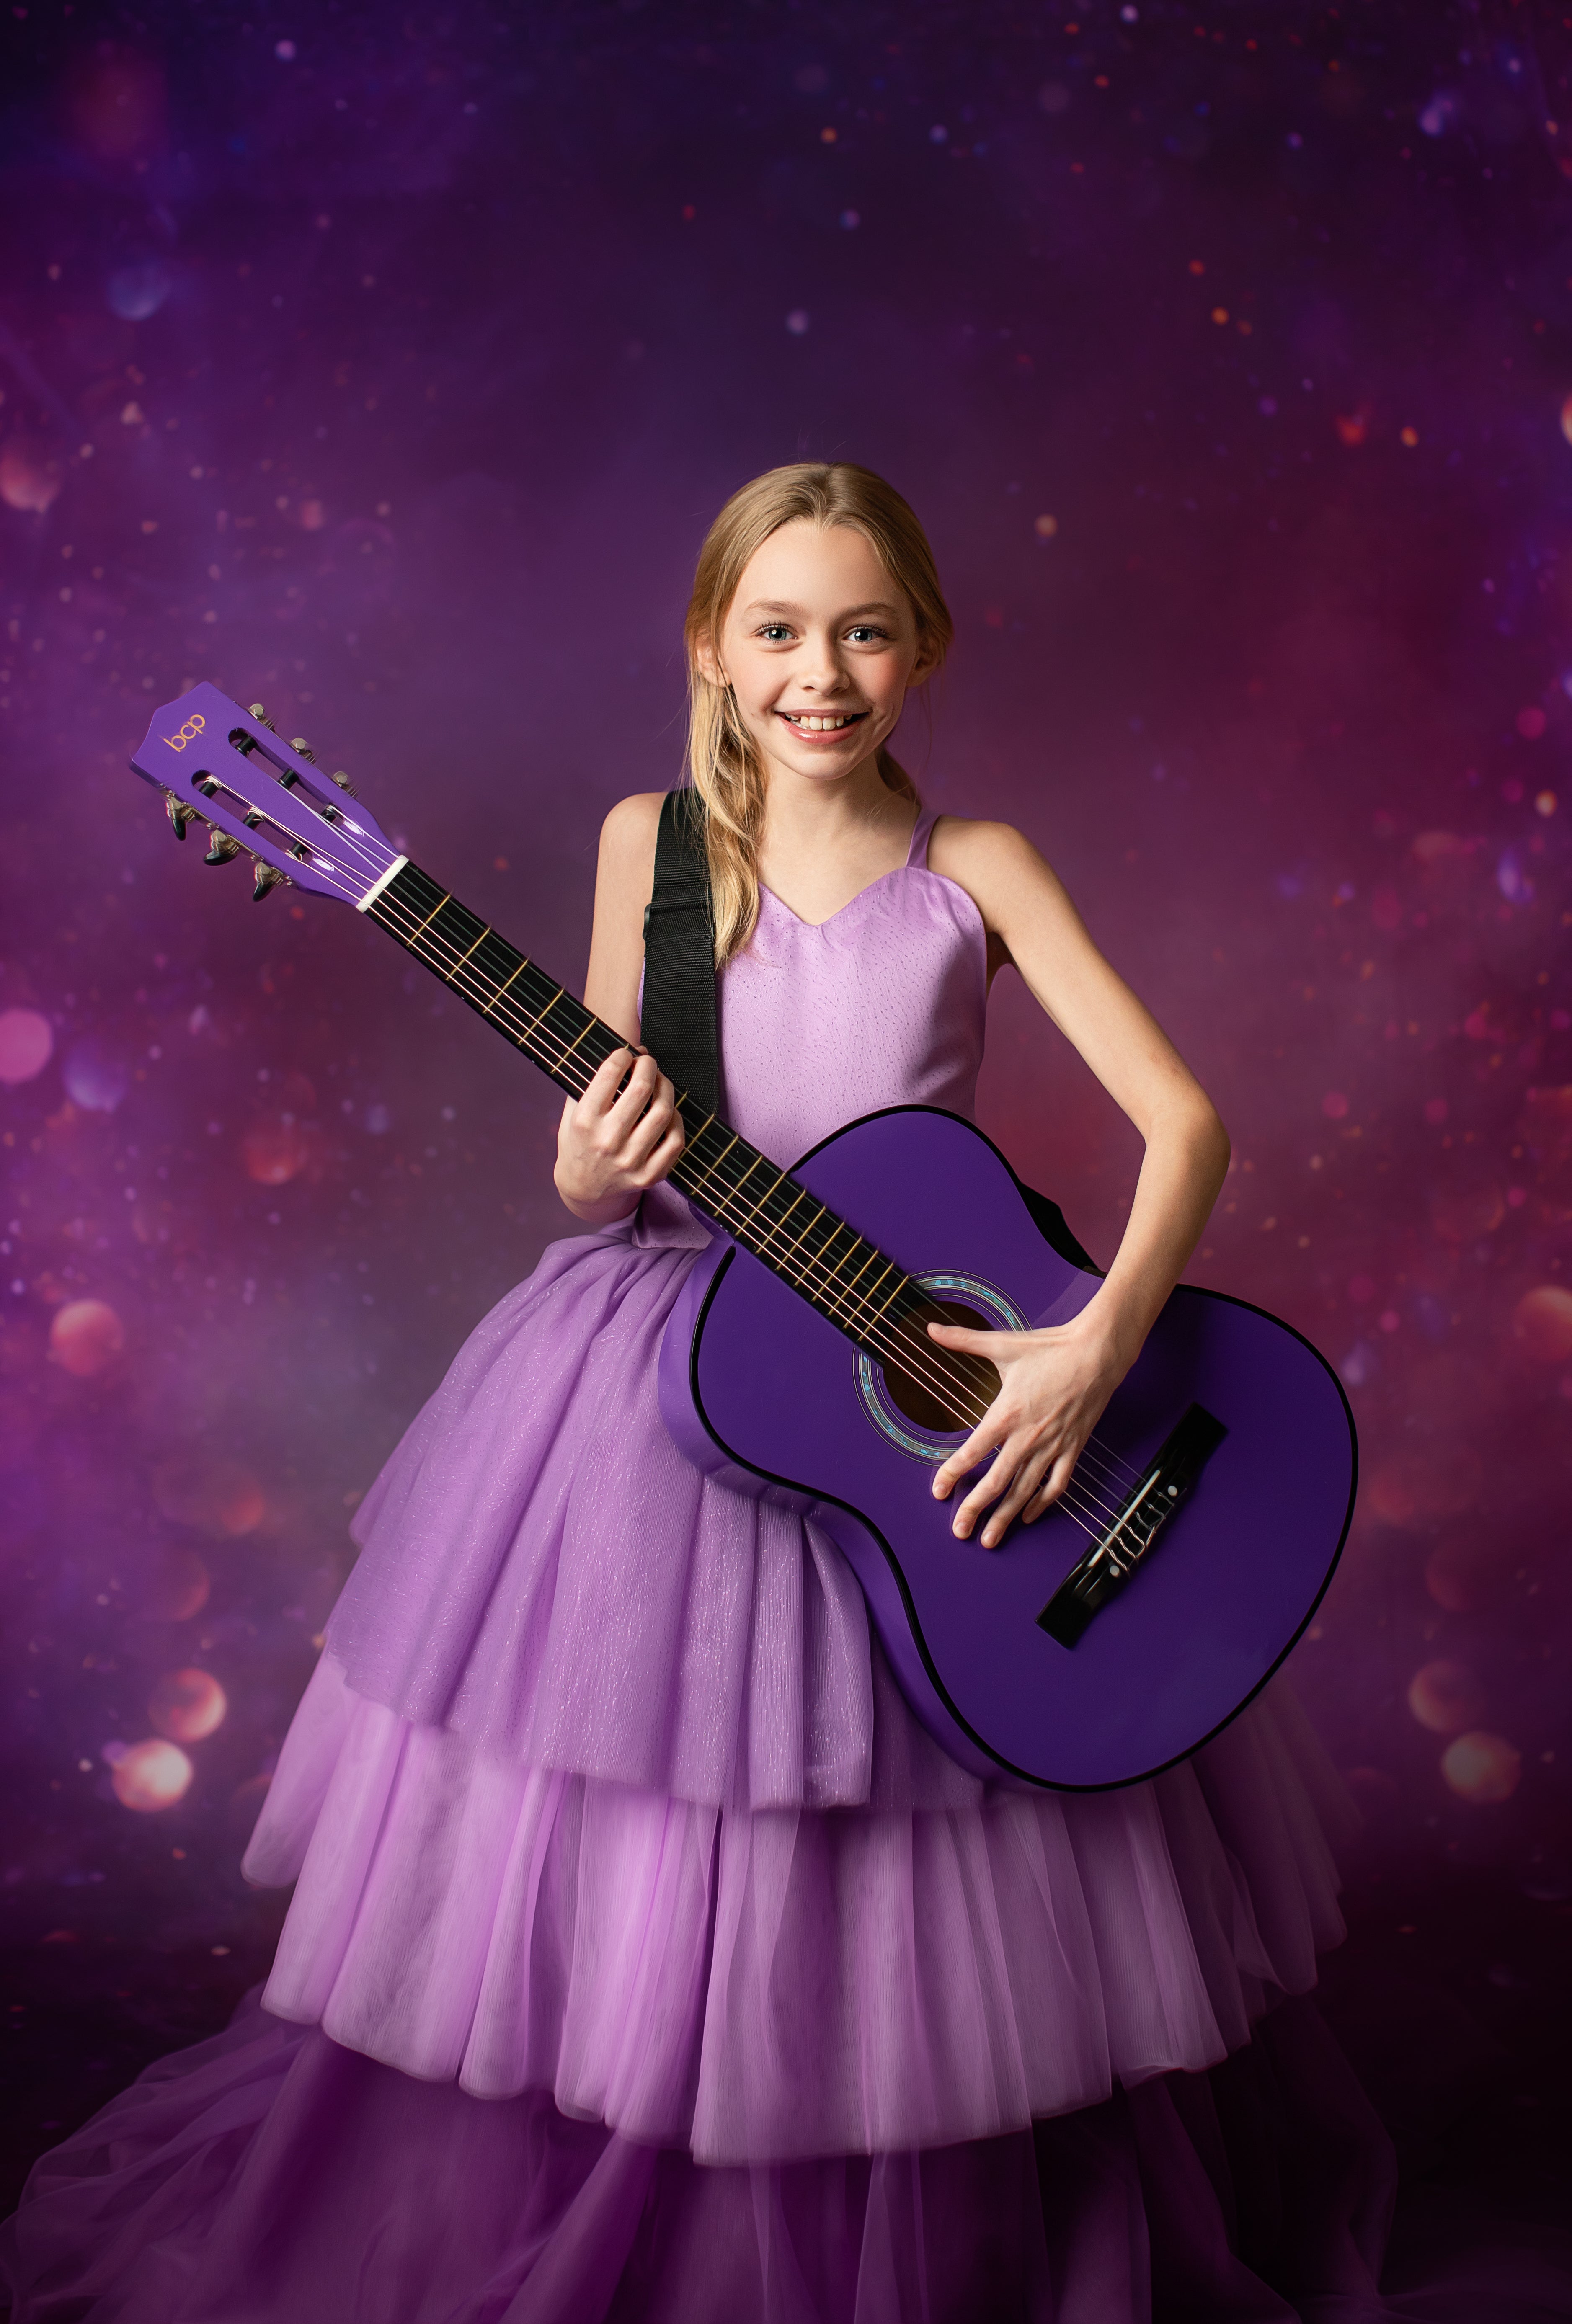 Young Swiftie in a lavender ball gown channels her inner Taylor Swift, singing passionately under a spotlight on a purple and blue stage.